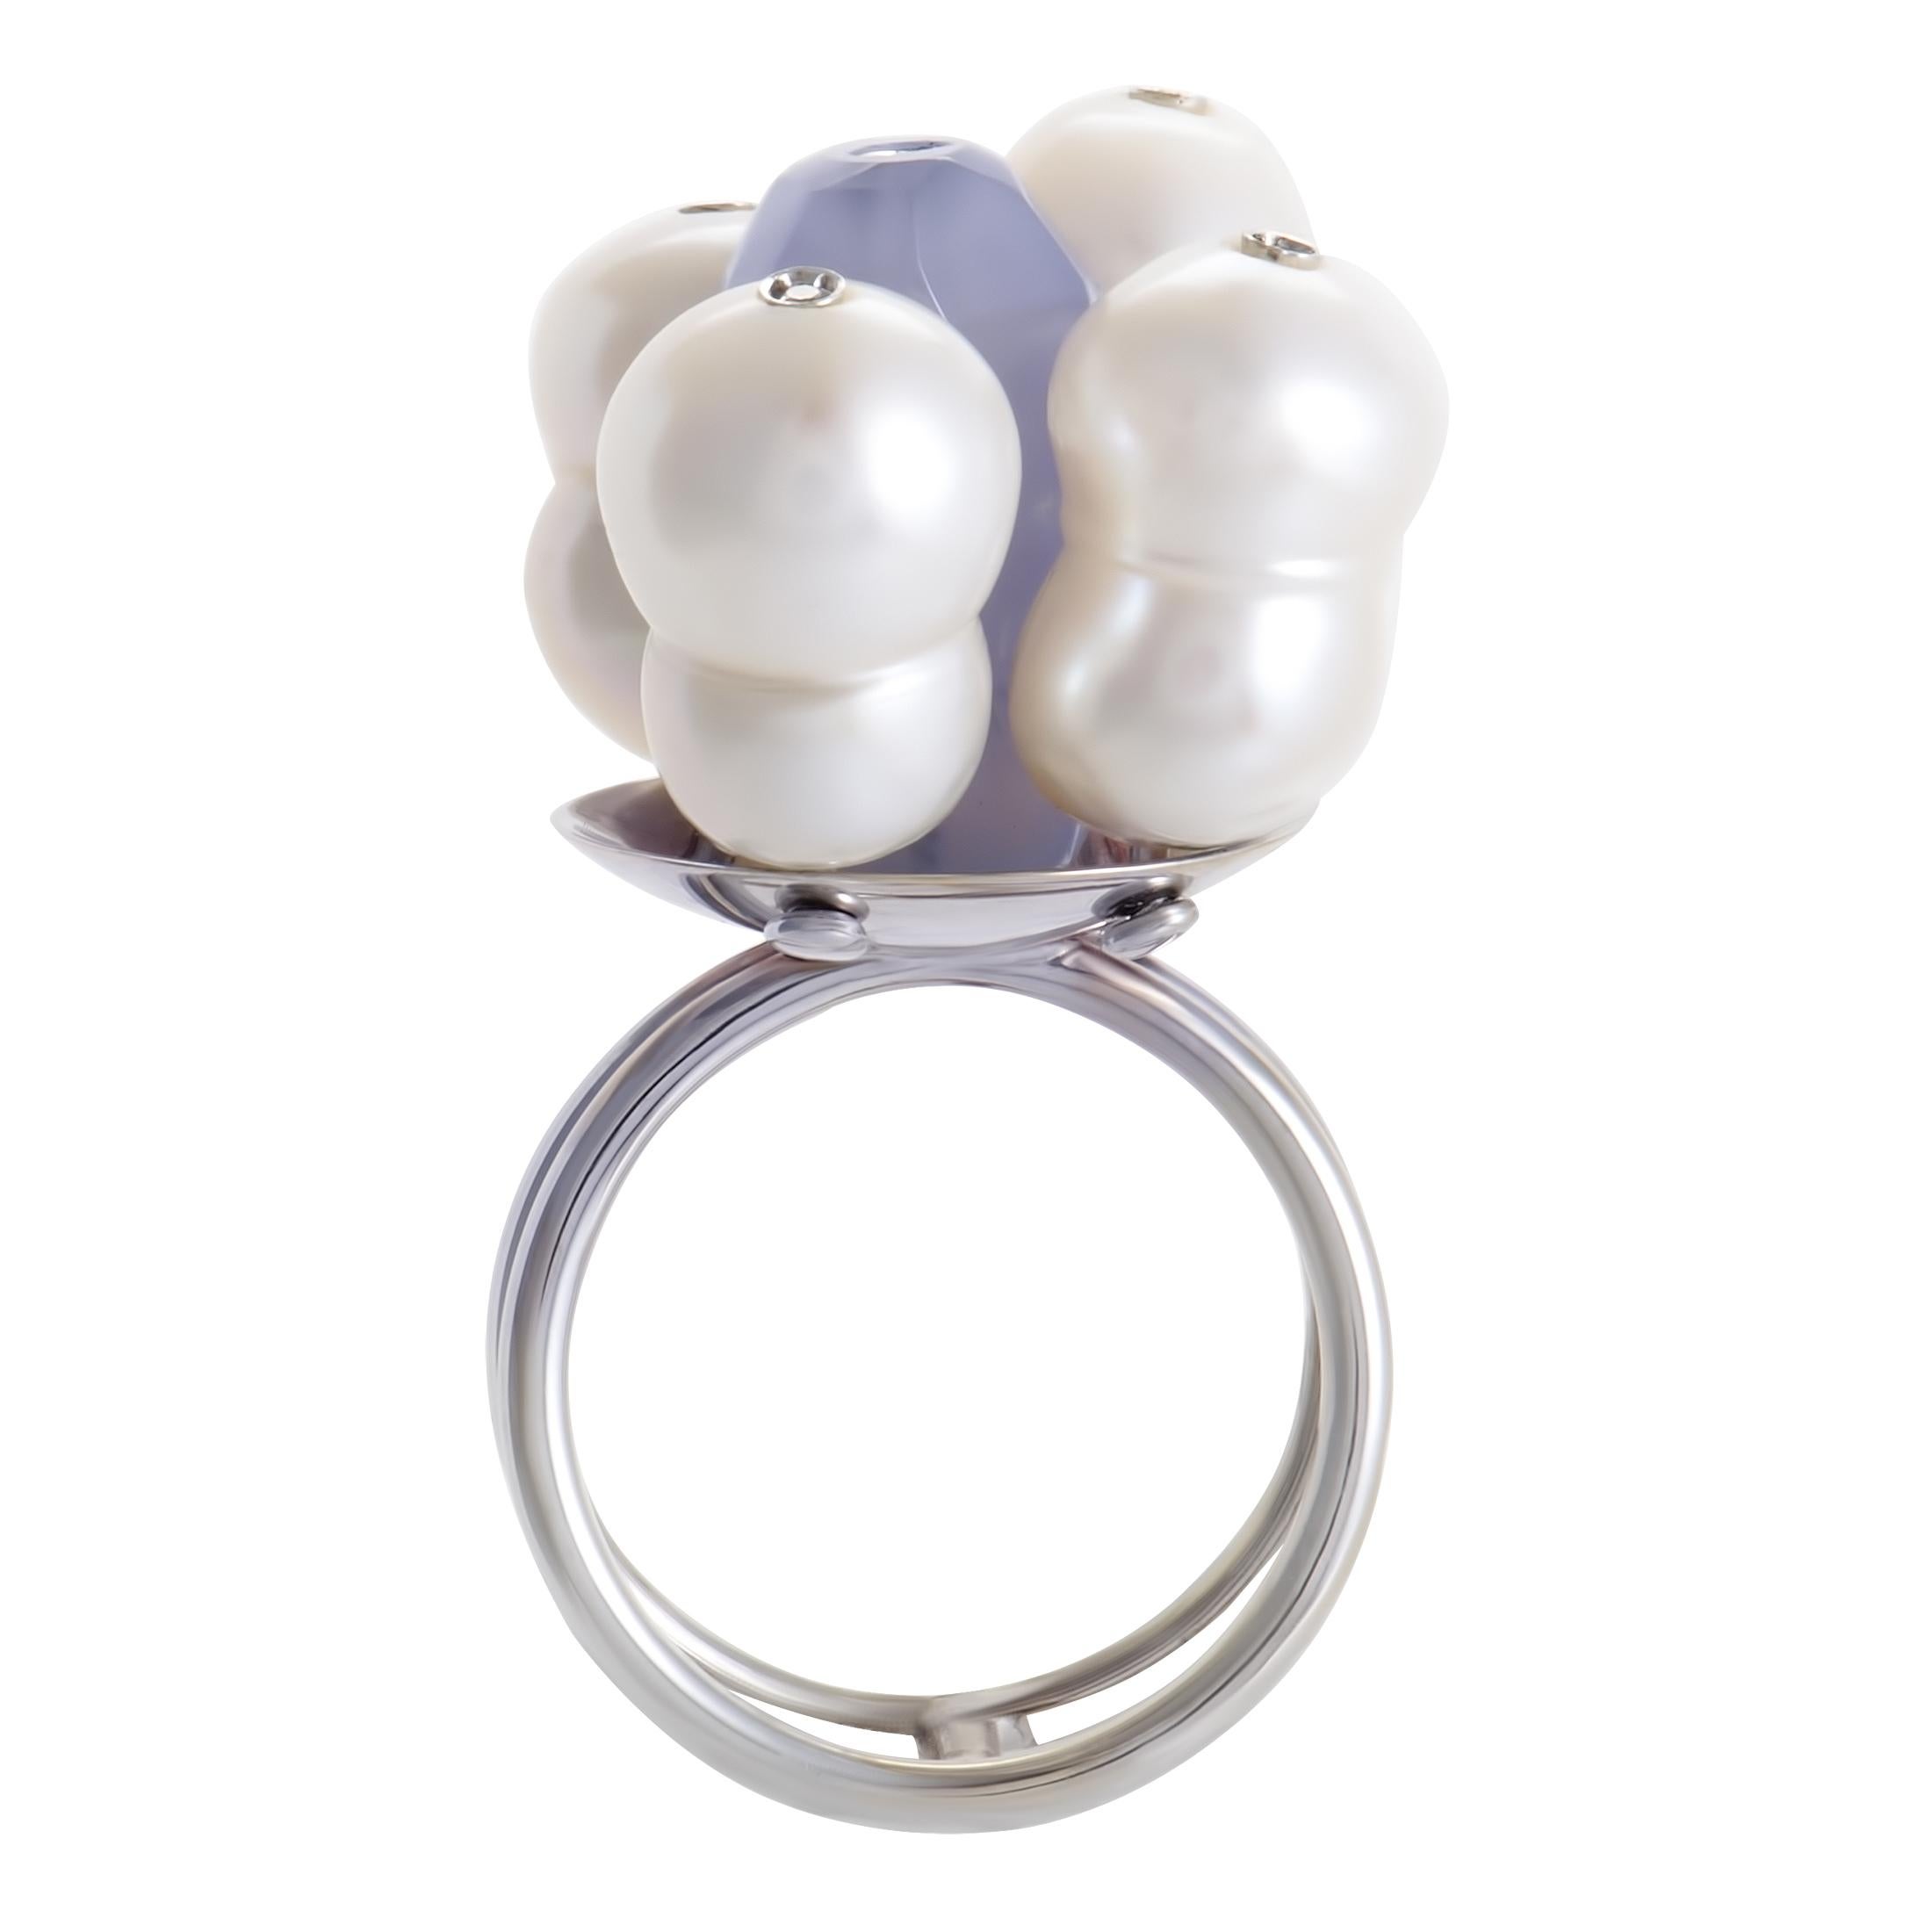 This ring from Roberto Demeglio is unique and an eye-catcher.The setting is made of 18K white gold and boasts a design of four Baroque pearls and a faceted corundum stone. Lastly, each pearl and the corundum are set with diamonds (~.06ct).
Ring